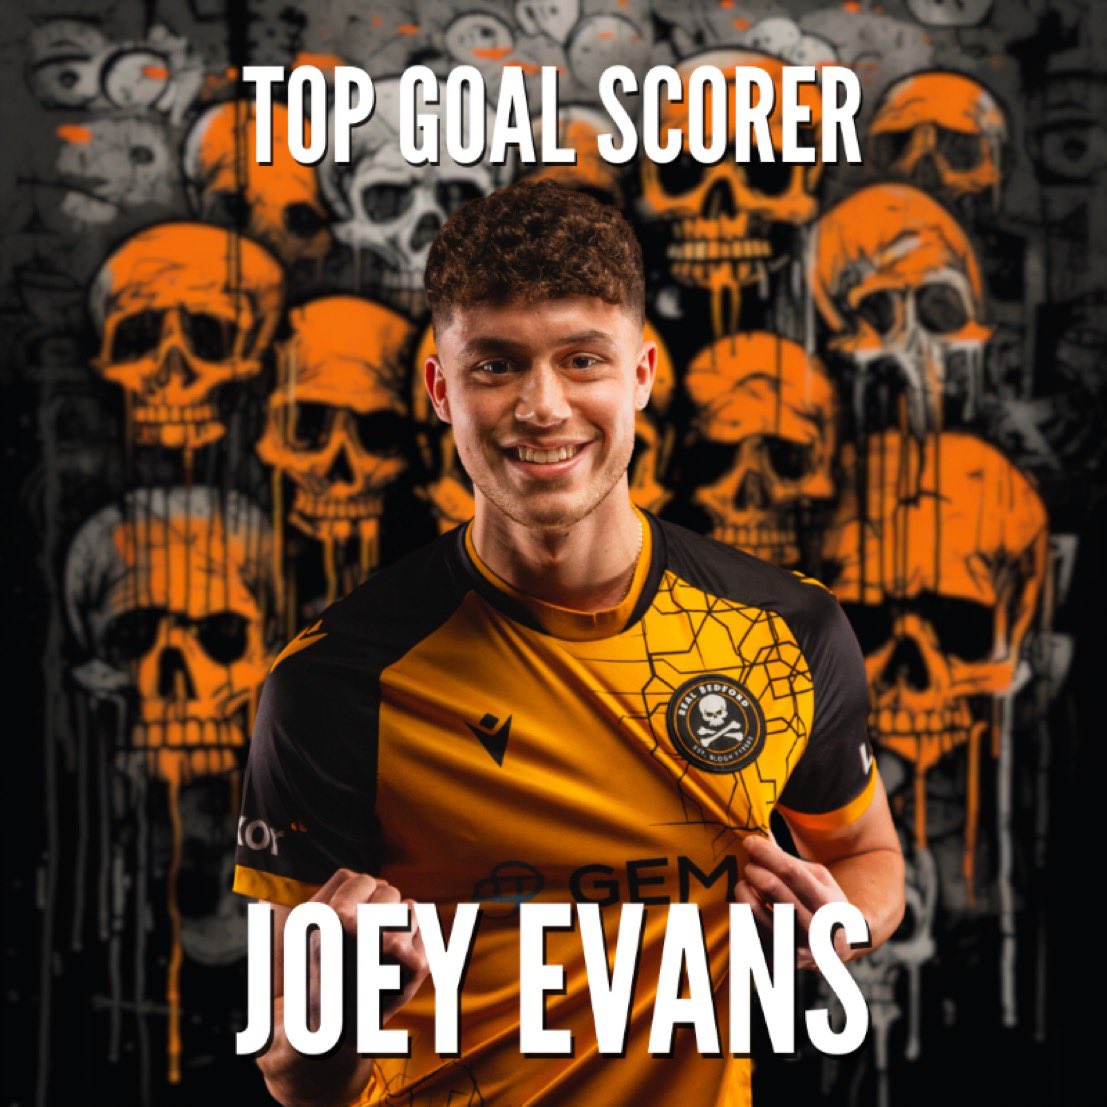 ⚽️ 𝐍𝐞𝐯𝐞𝐫 𝐒𝐭𝐨𝐩𝐬. With 43 goals to his name, @joeyevans_ is our Top Goal Scorer this season 🔥 #RBFC 🏴‍☠️